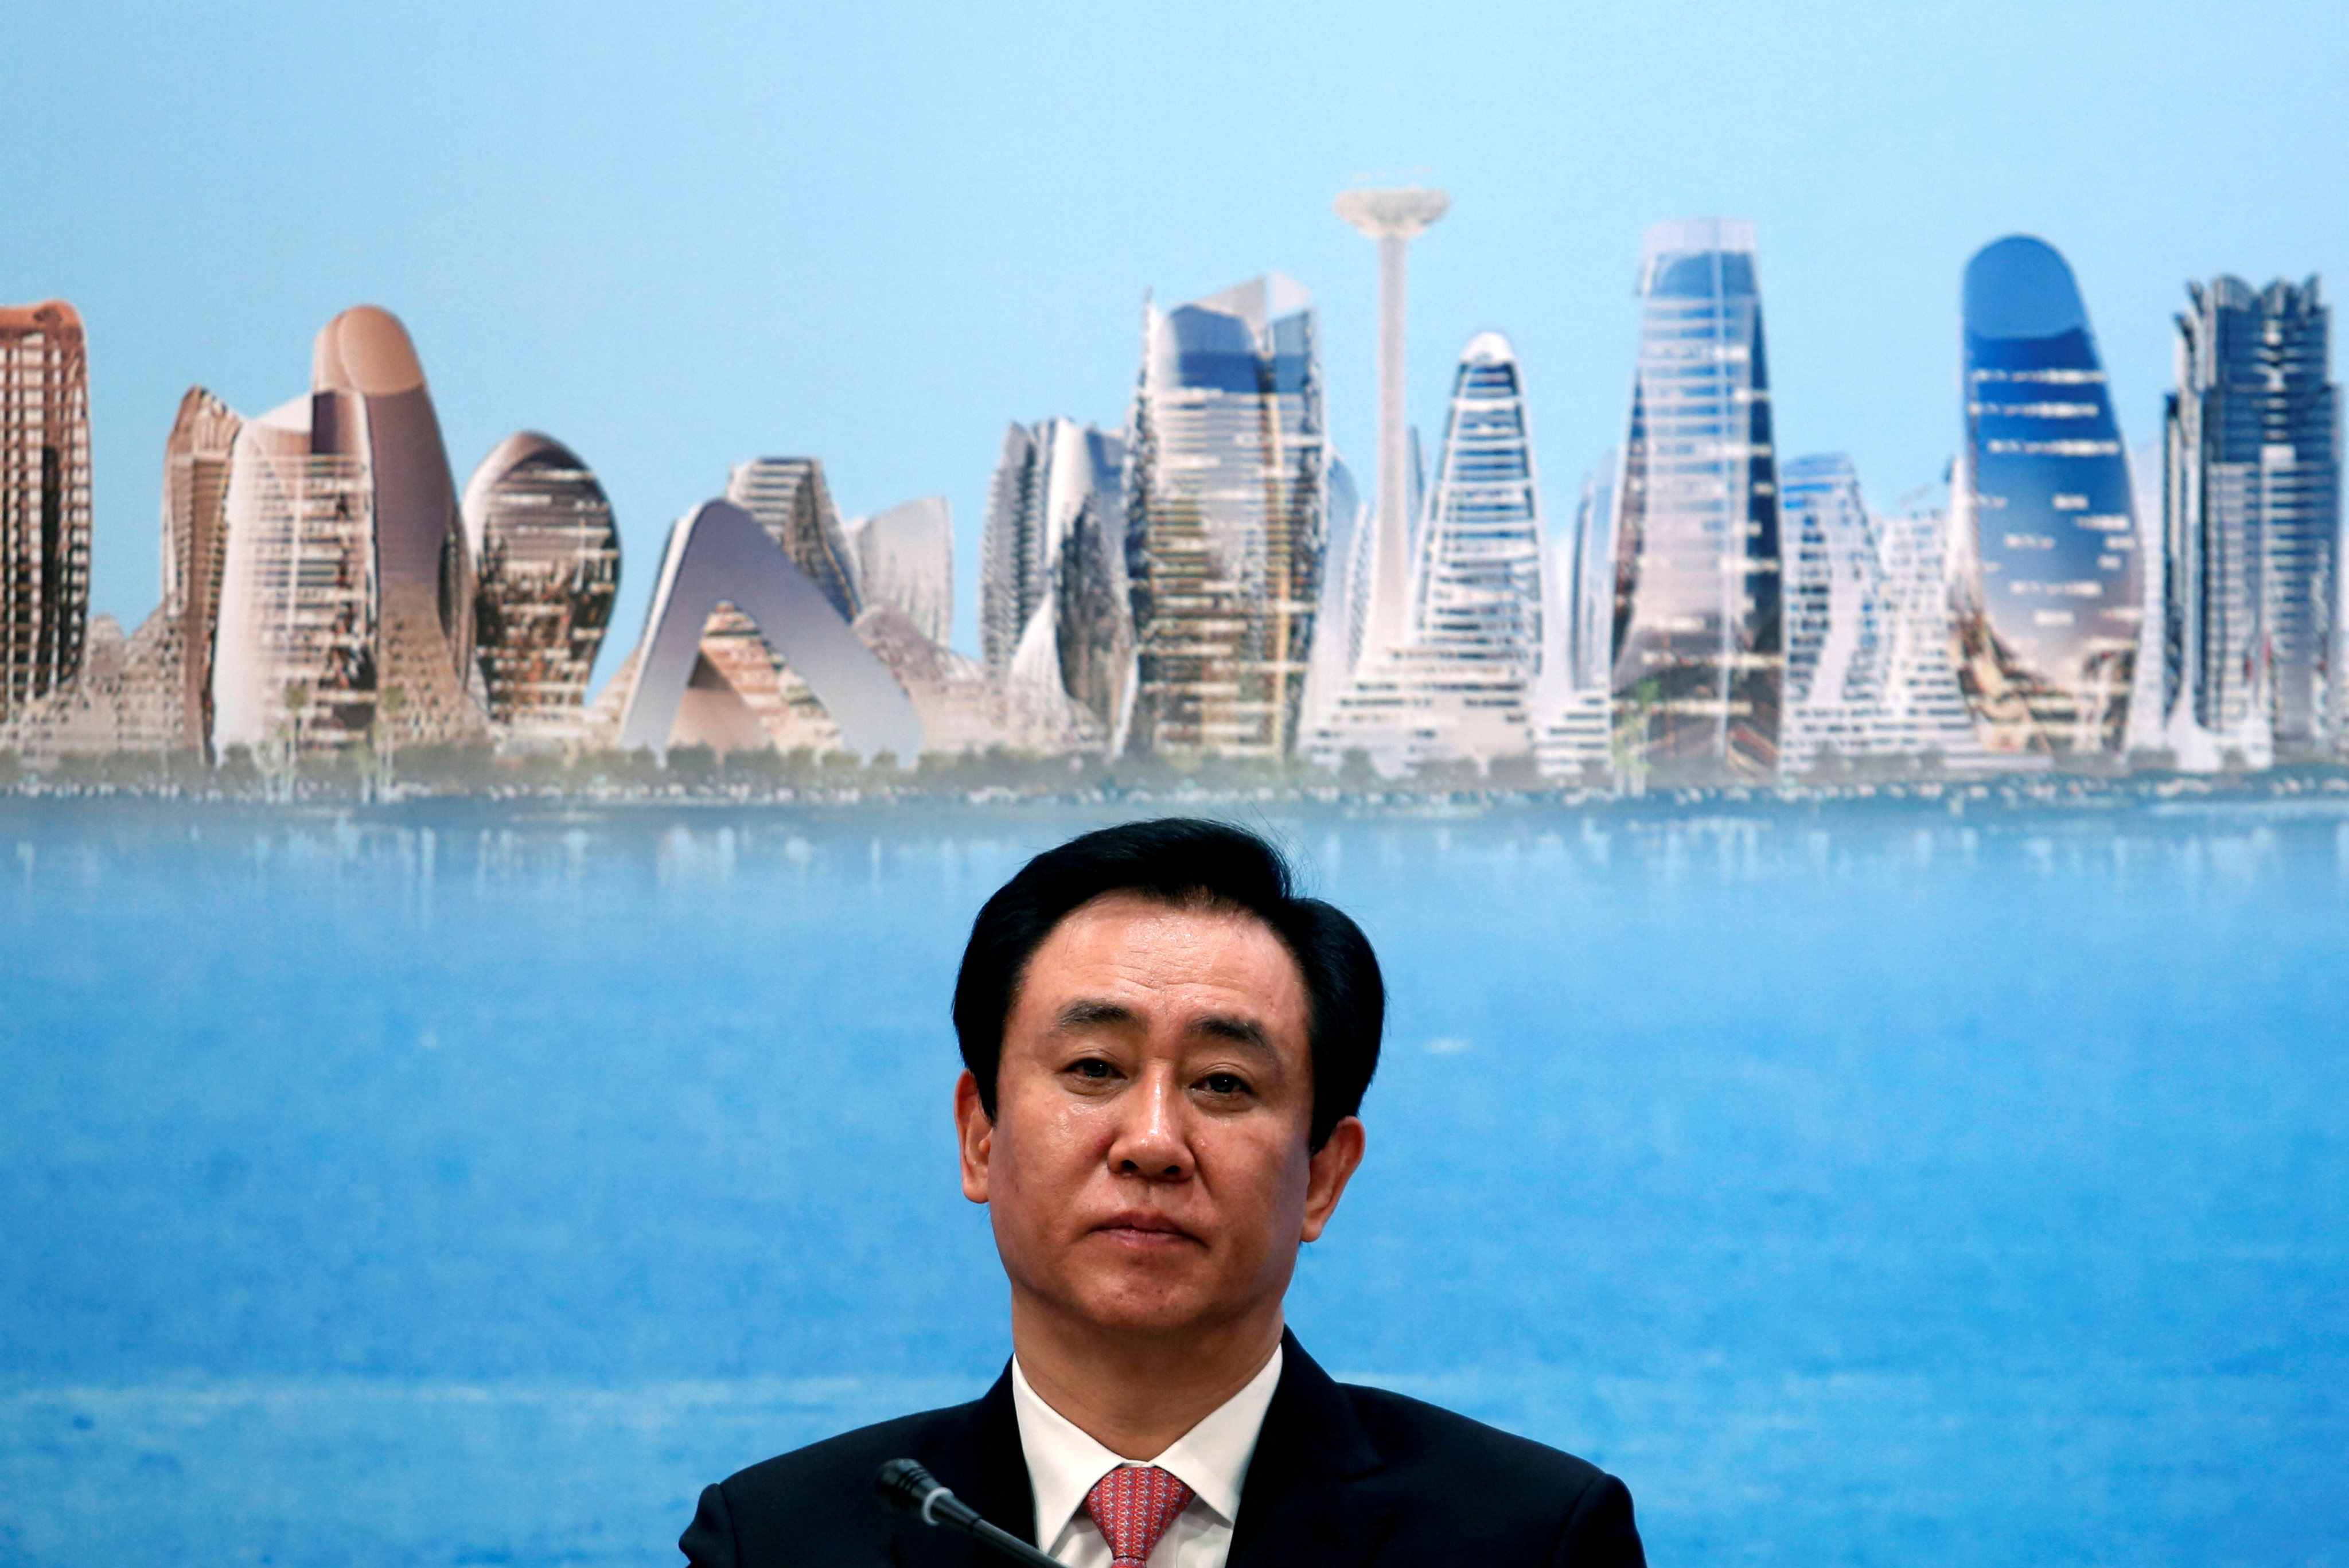 China Evergrande Group Chairman Hui Ka Yan at a press conference on the property developer’s annual results in Hong Kong on March 28, 2017. Photo: Reuters